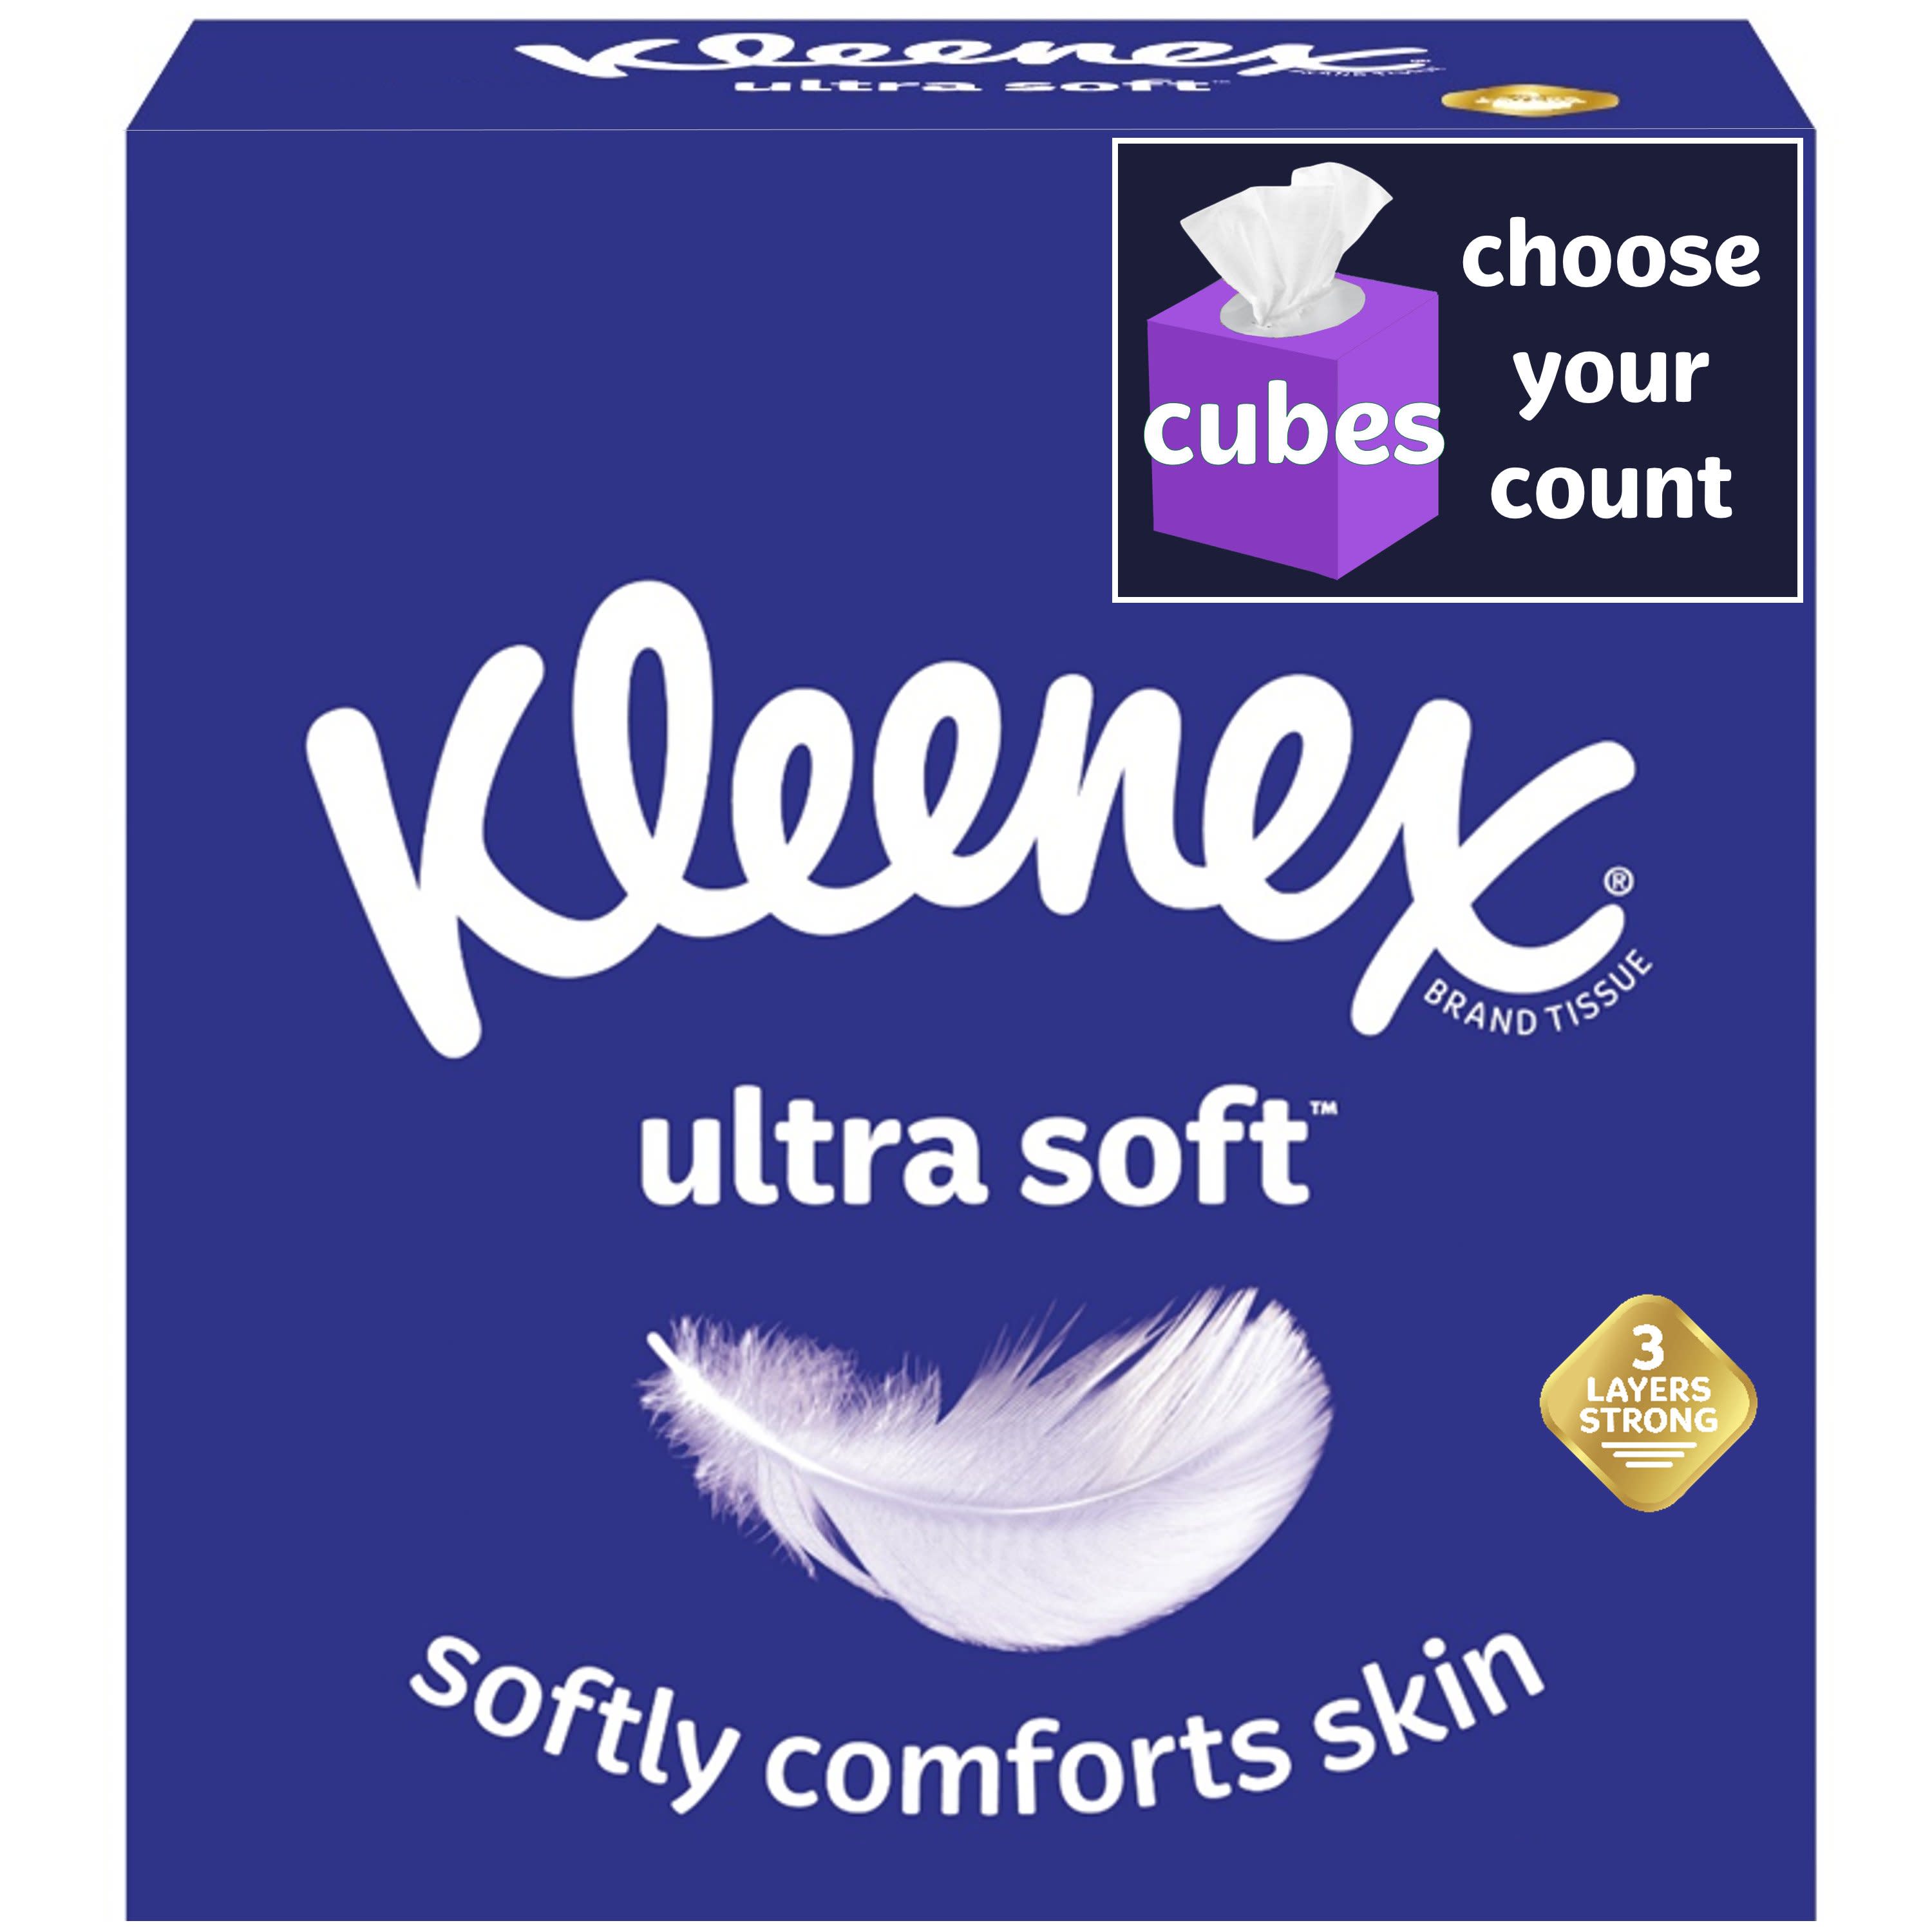 Kleenex Ultra Soft Facial Tissues, 4 Cube Boxes, 65 White Tissues per Box, 3-Ply (260 Total) - image 1 of 11